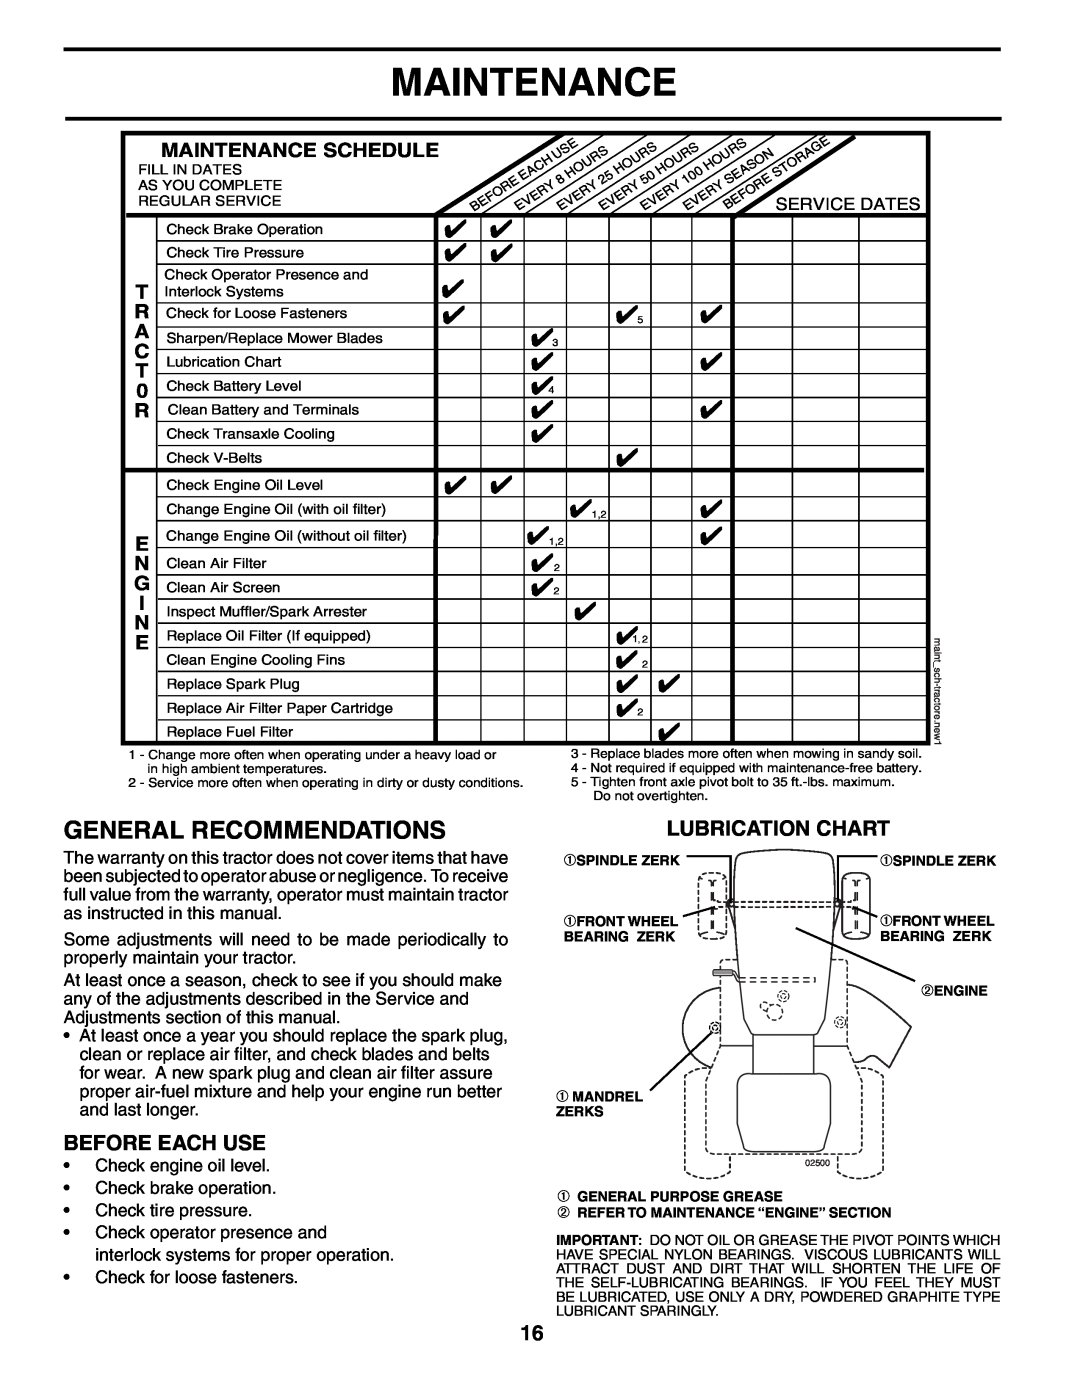 Poulan PD25PH48STB owner manual General Recommendations, Lubrication Chart, Before Each Use, Maintenance Schedule 